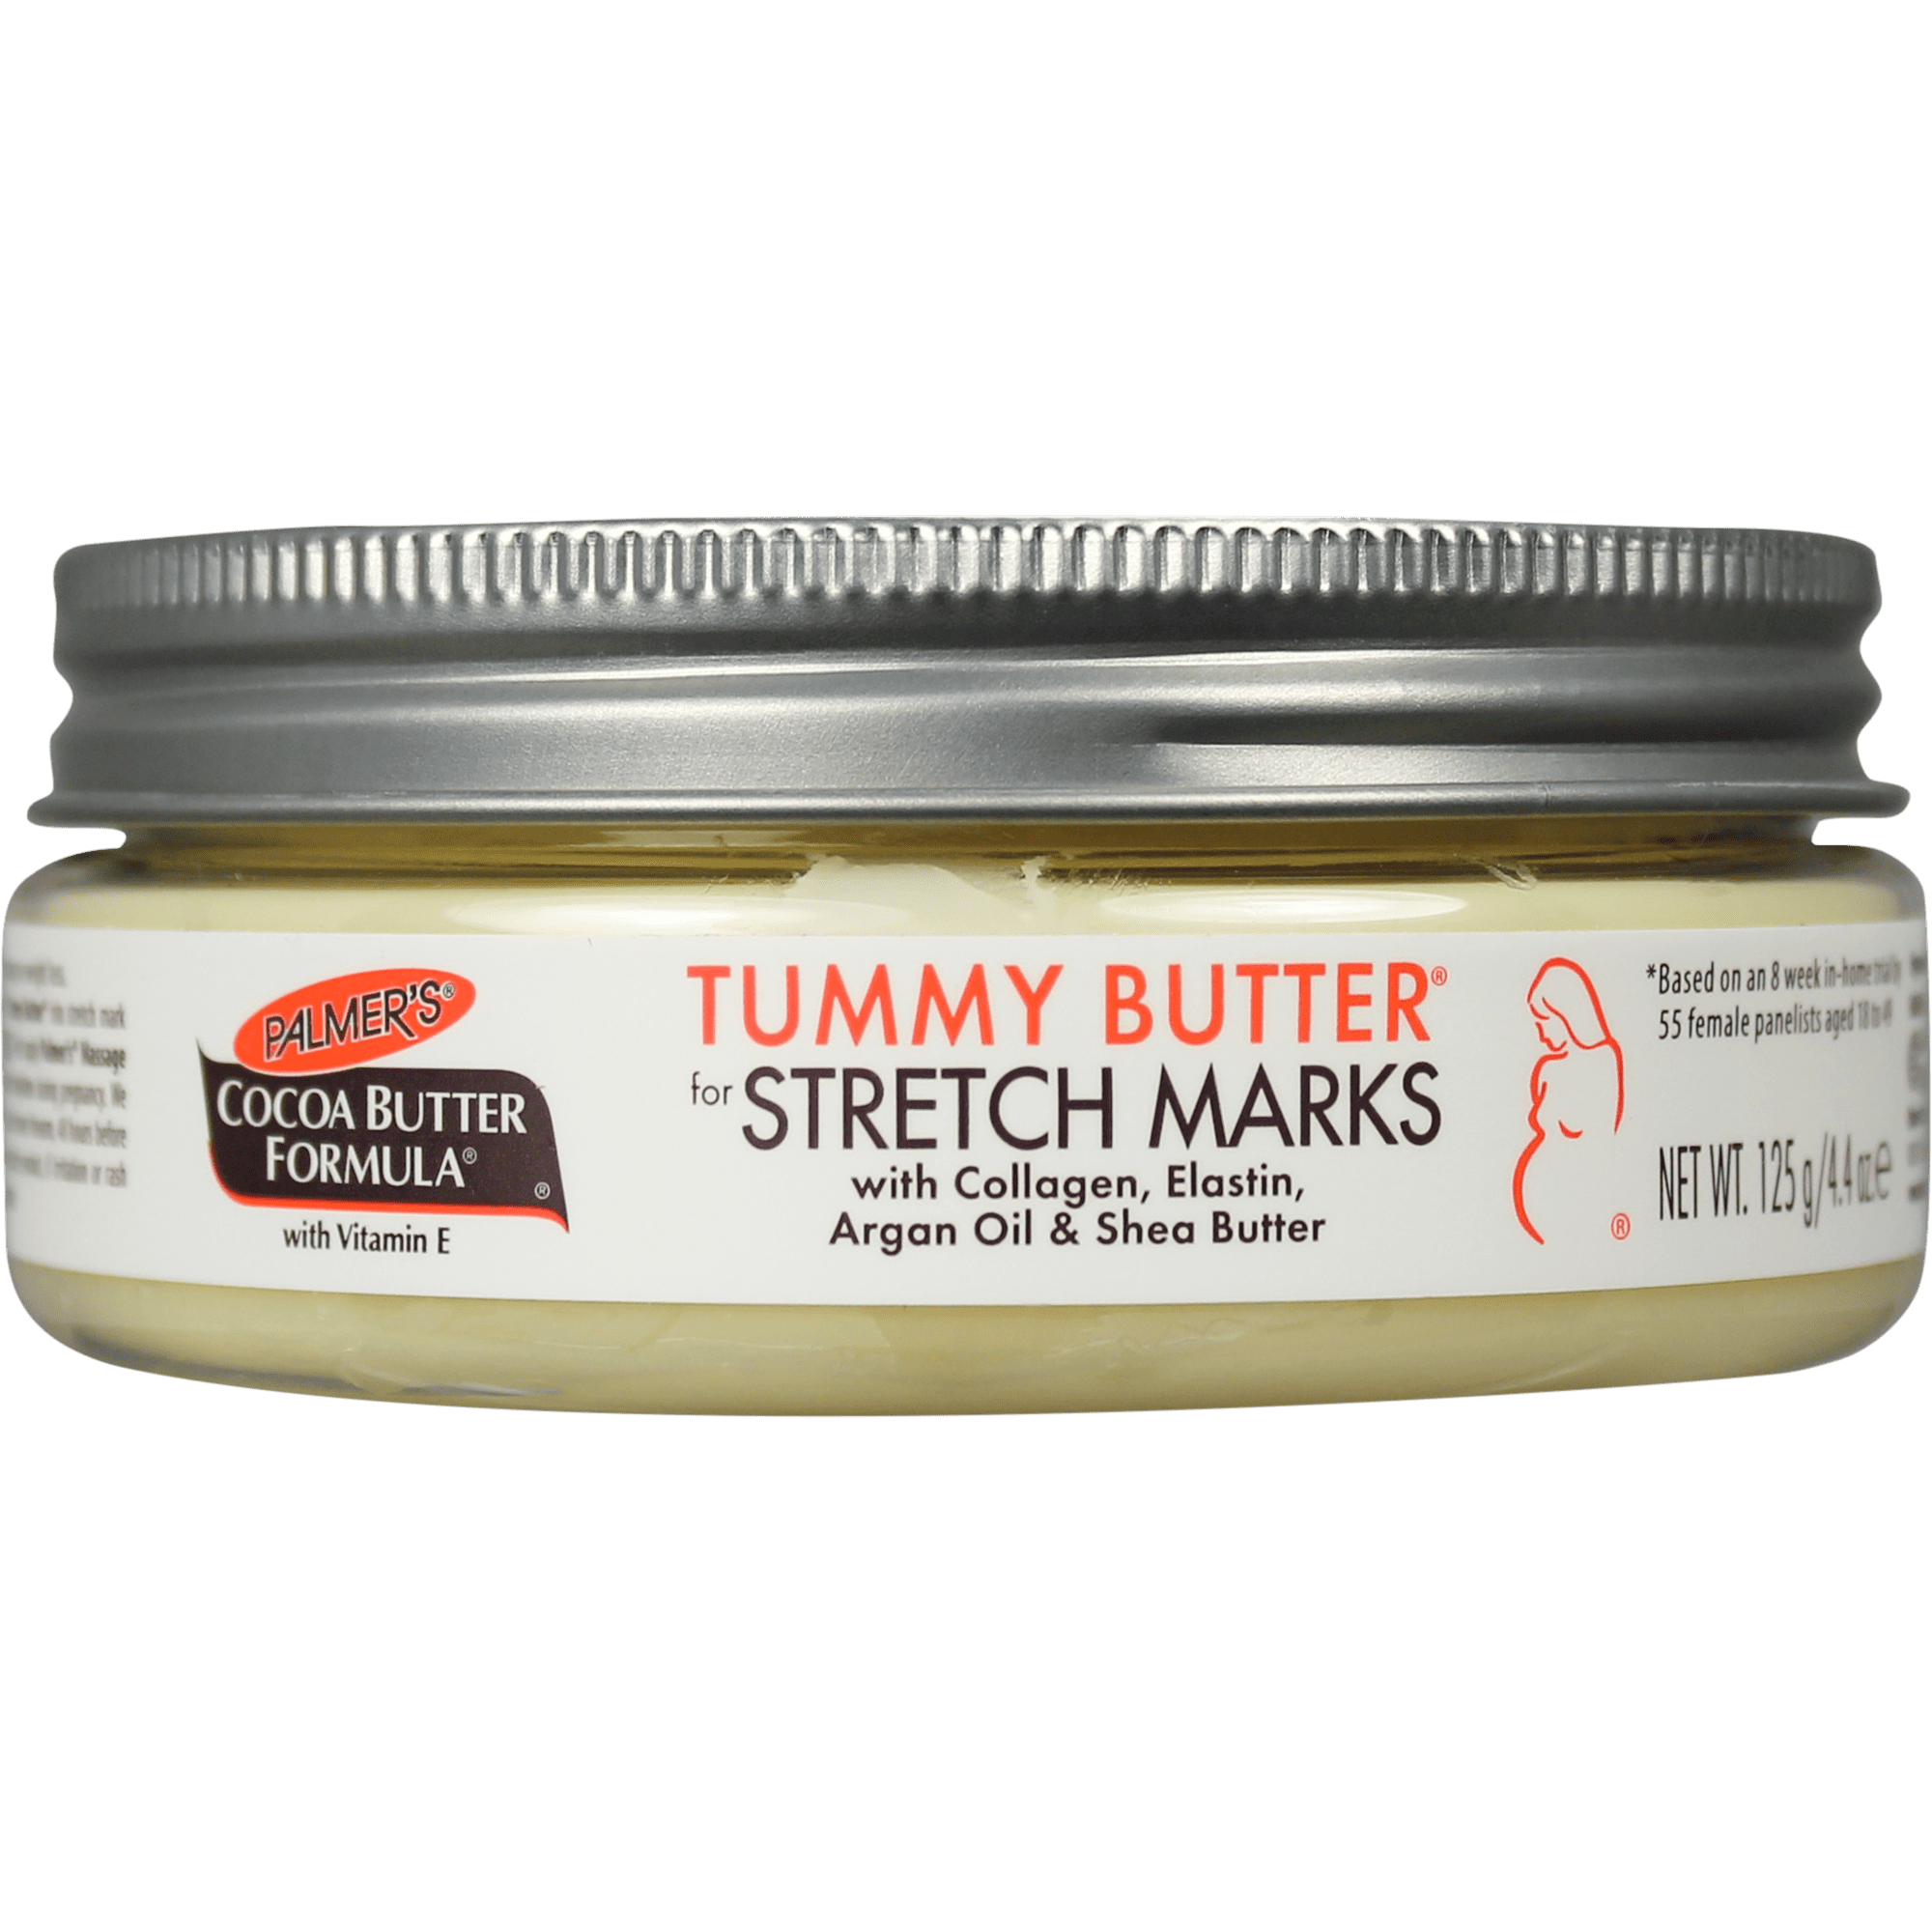 palmer-s-cocoa-butter-formula-tummy-butter-for-stretch-marks-and